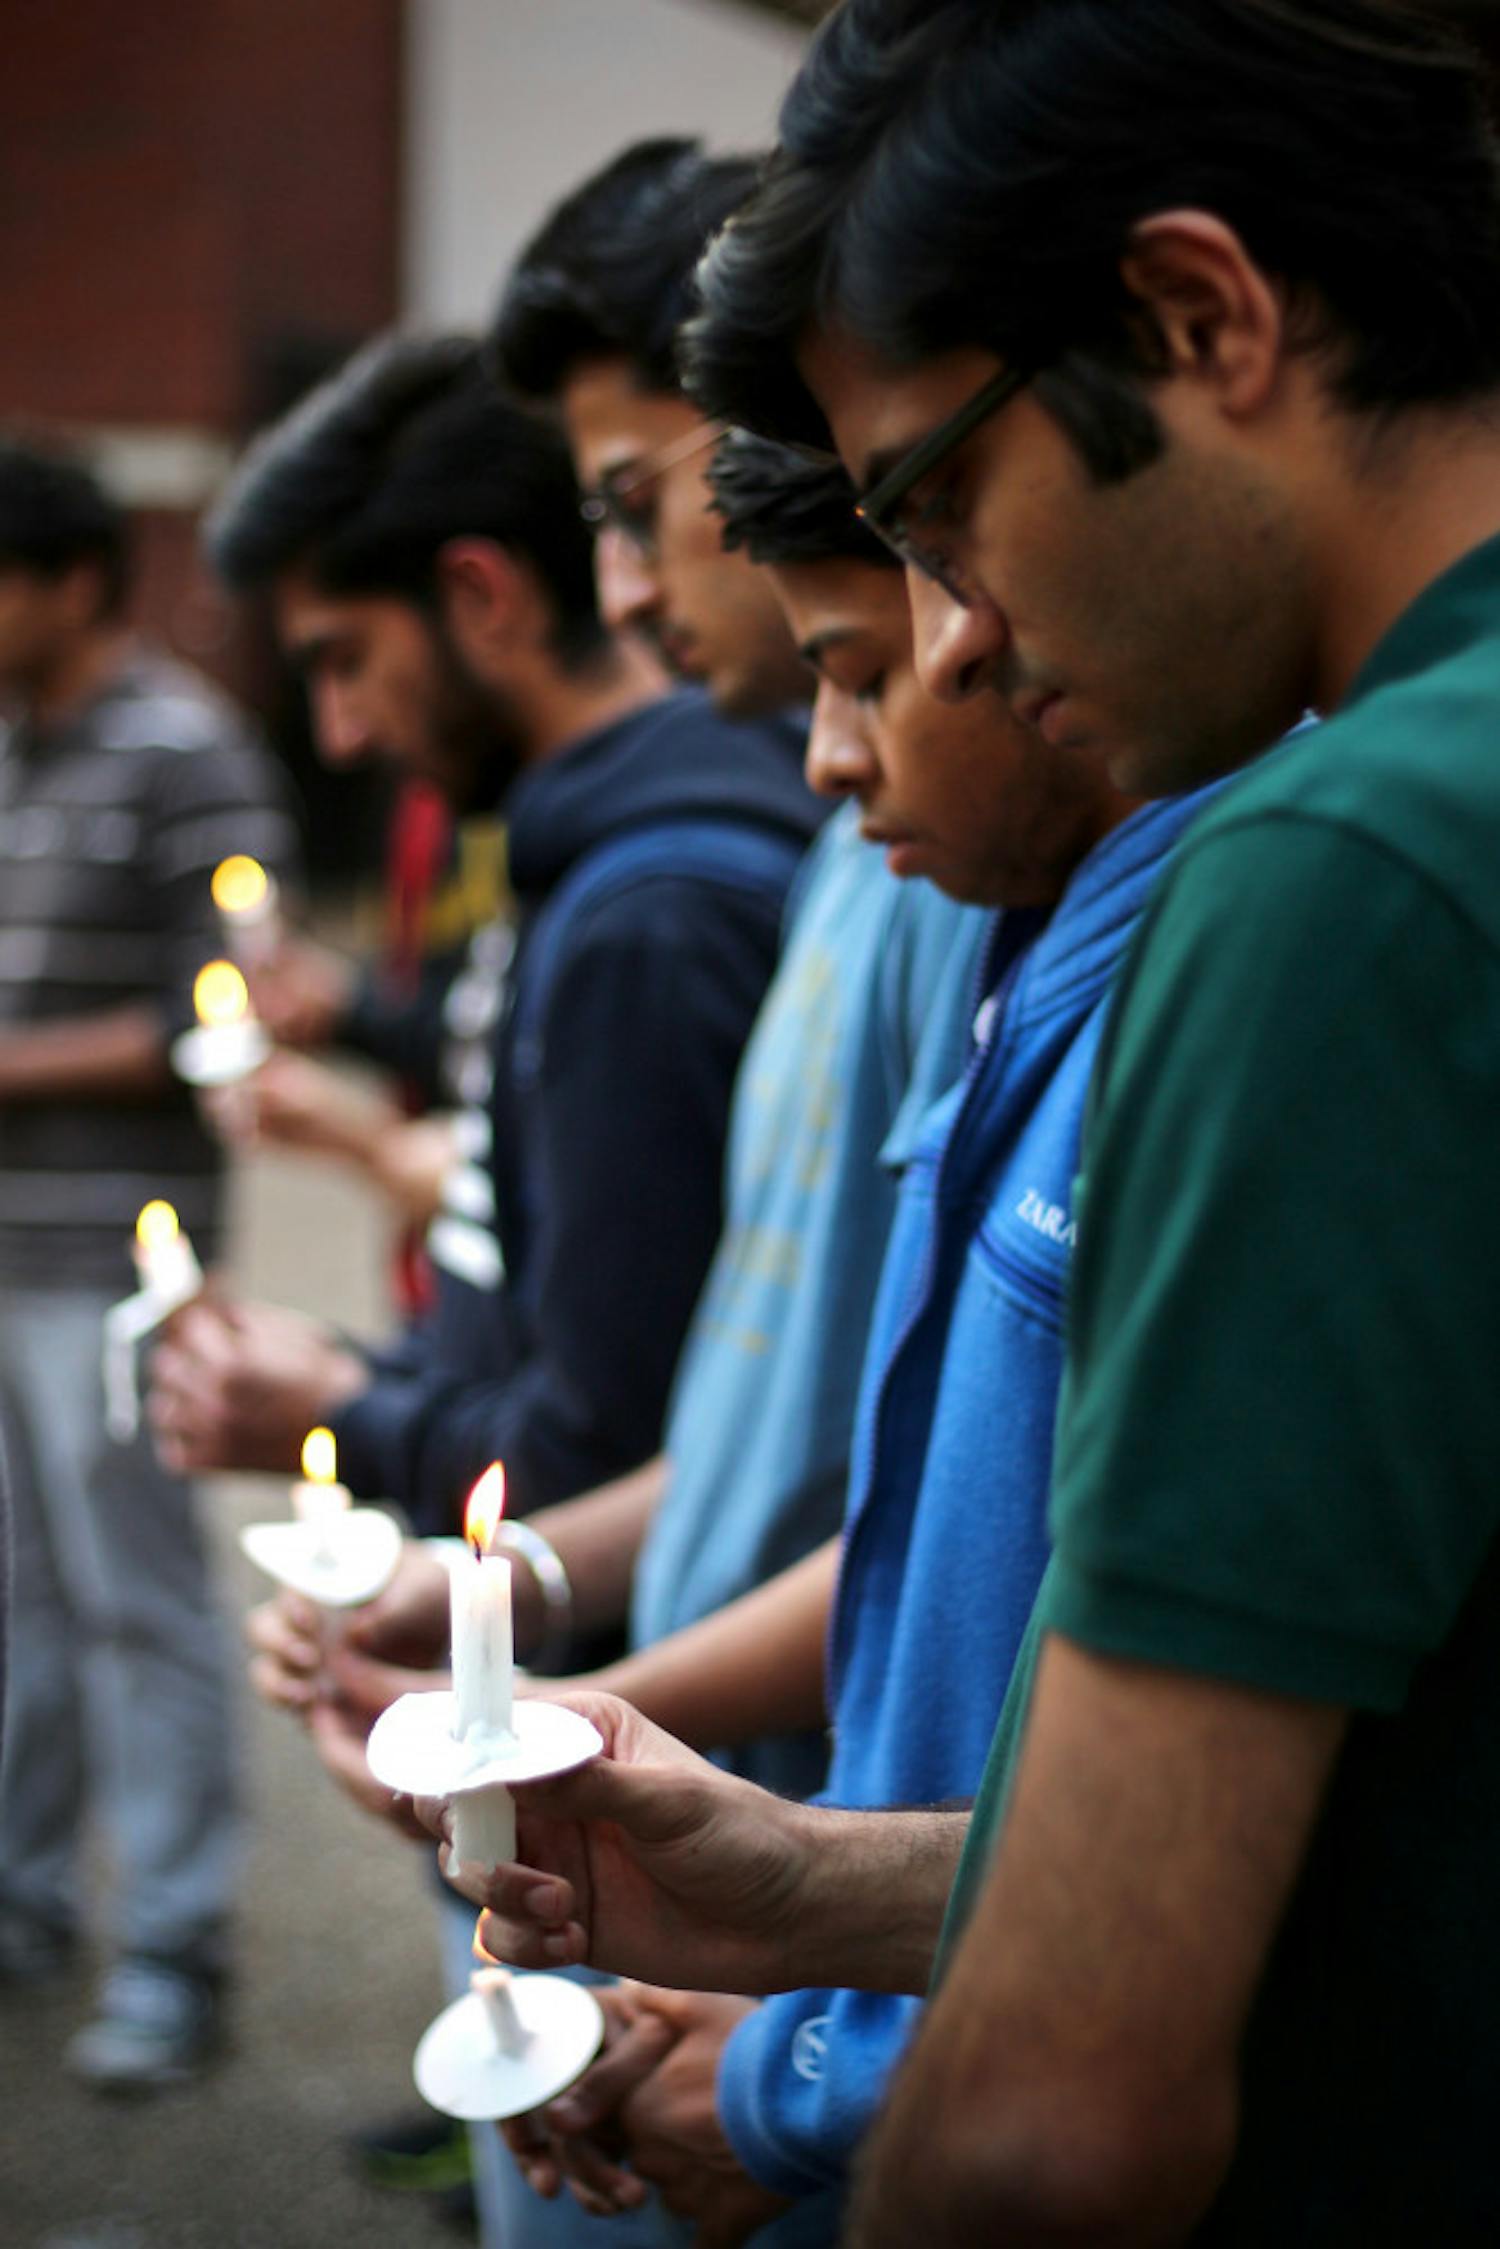 On Monday, about 100 stood on Turlington Plaza to mourn the death of Karan Khullar, a 22-year-old foreign exchange student who died on Feb. 11 after he was hit at a bus stop by a drunken driver, police said.
 